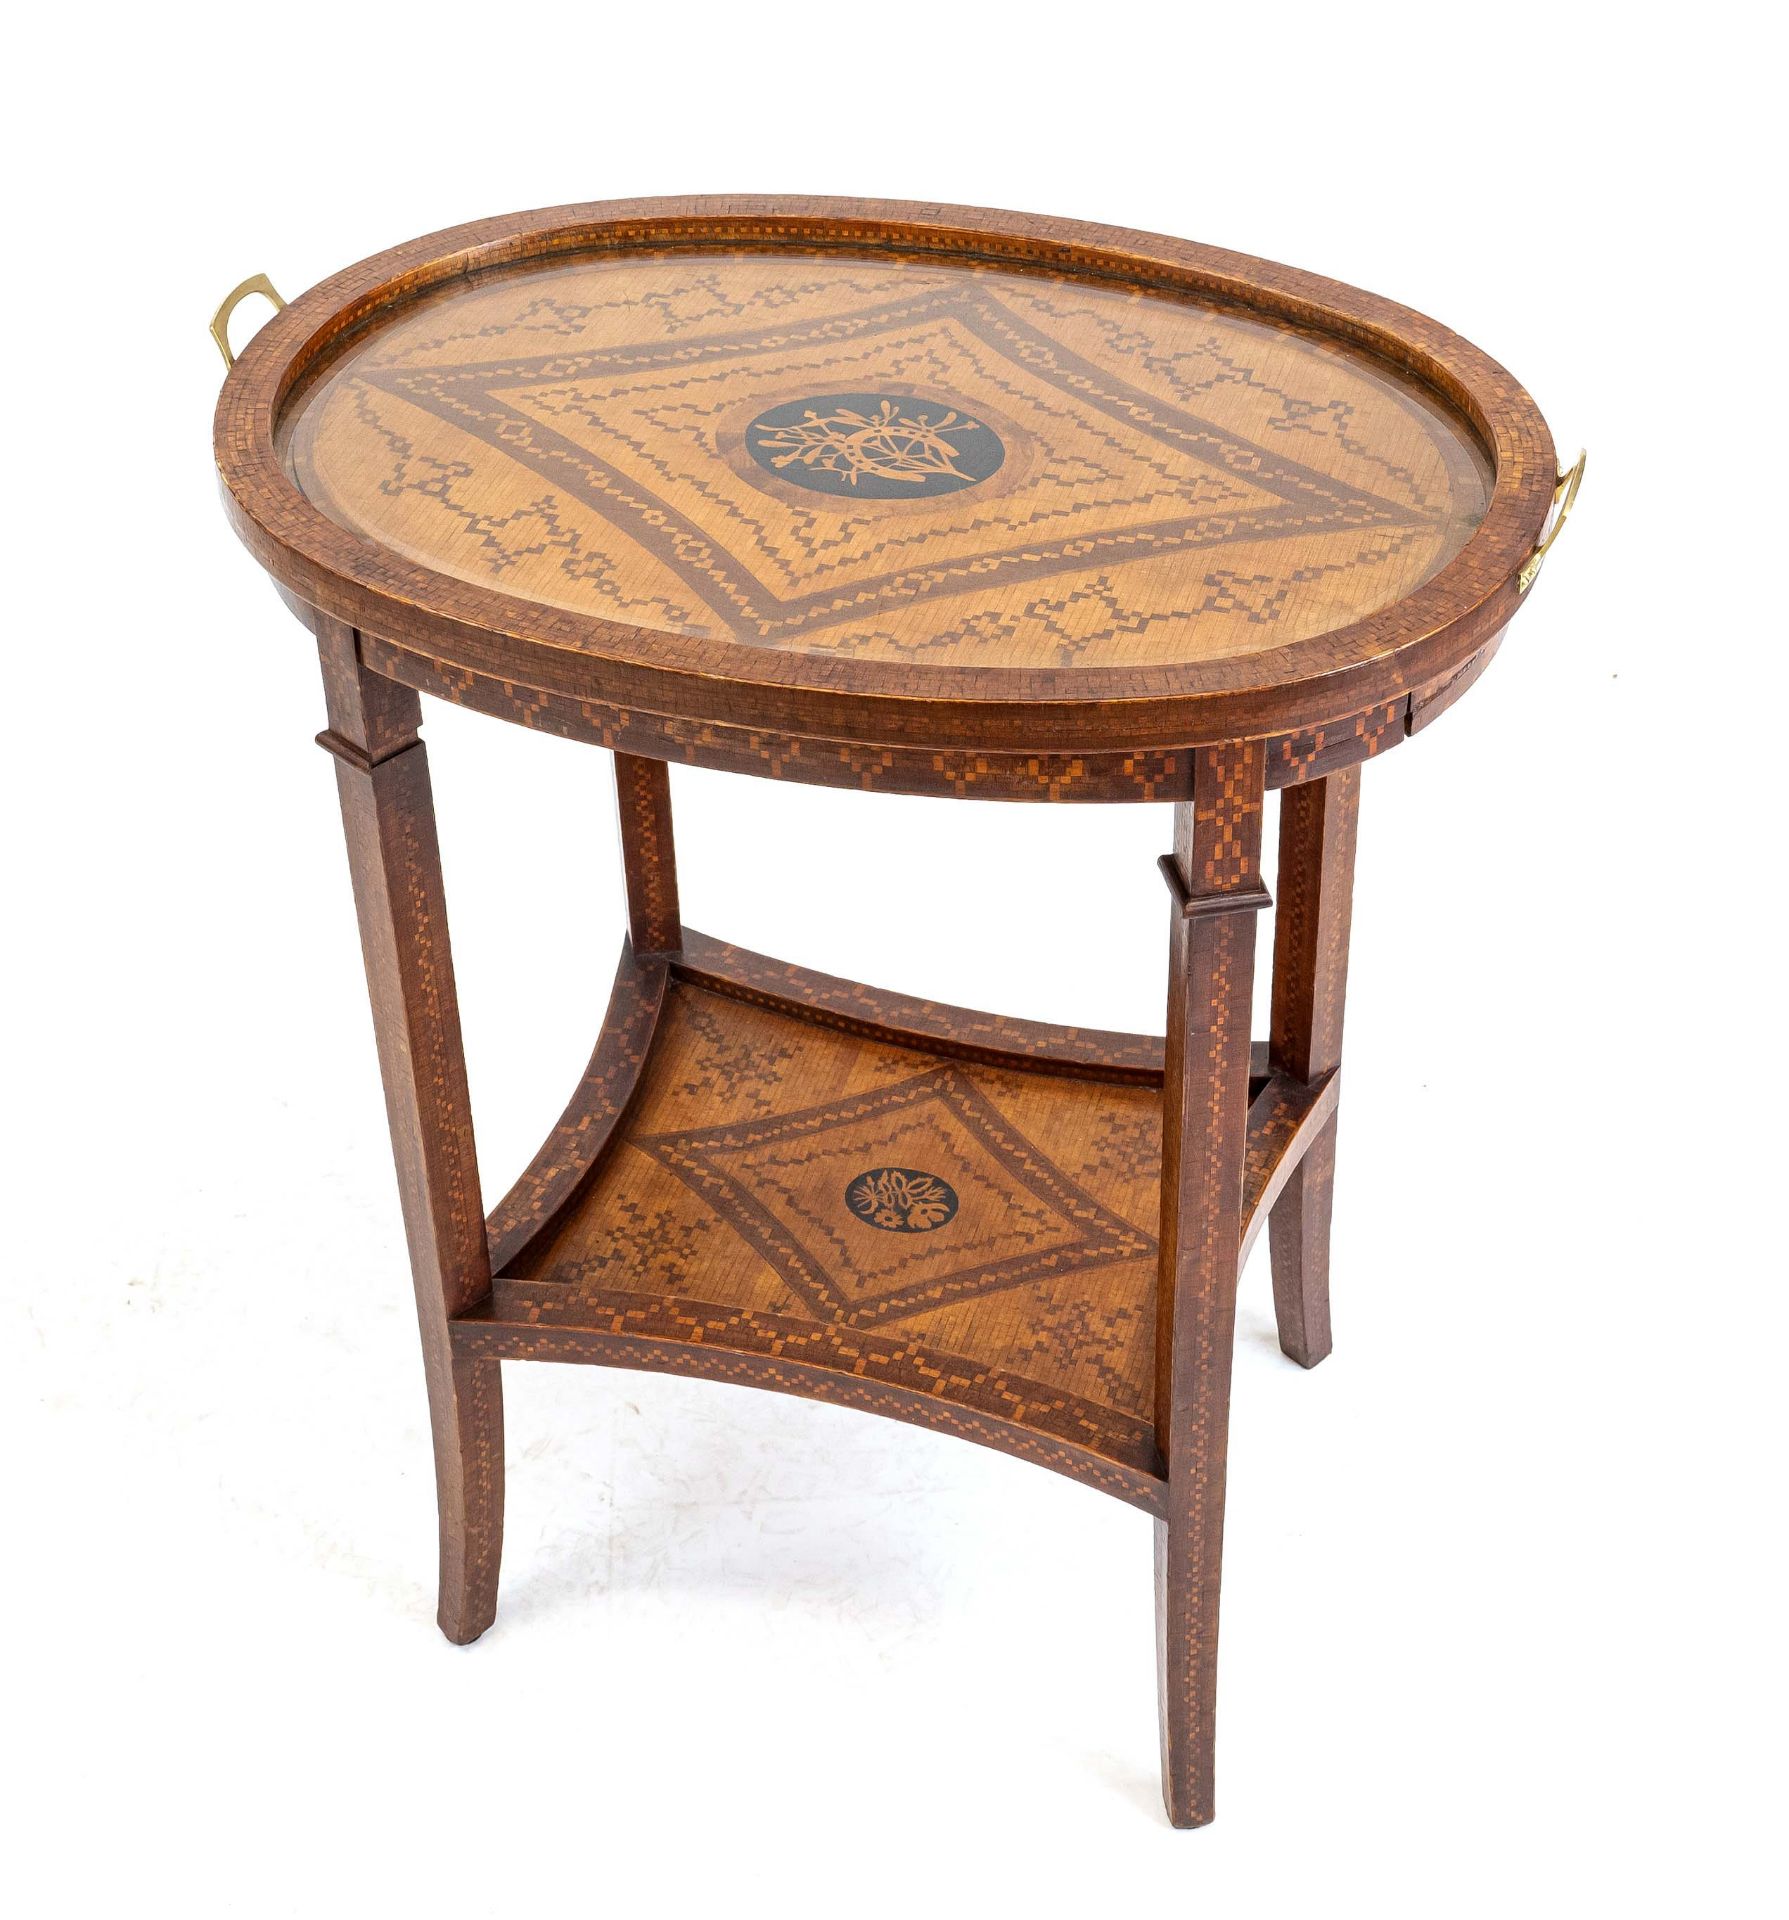 Matching tray table circa 1900, matching lots 5654 and 5656, walnut and other fine woods veneered